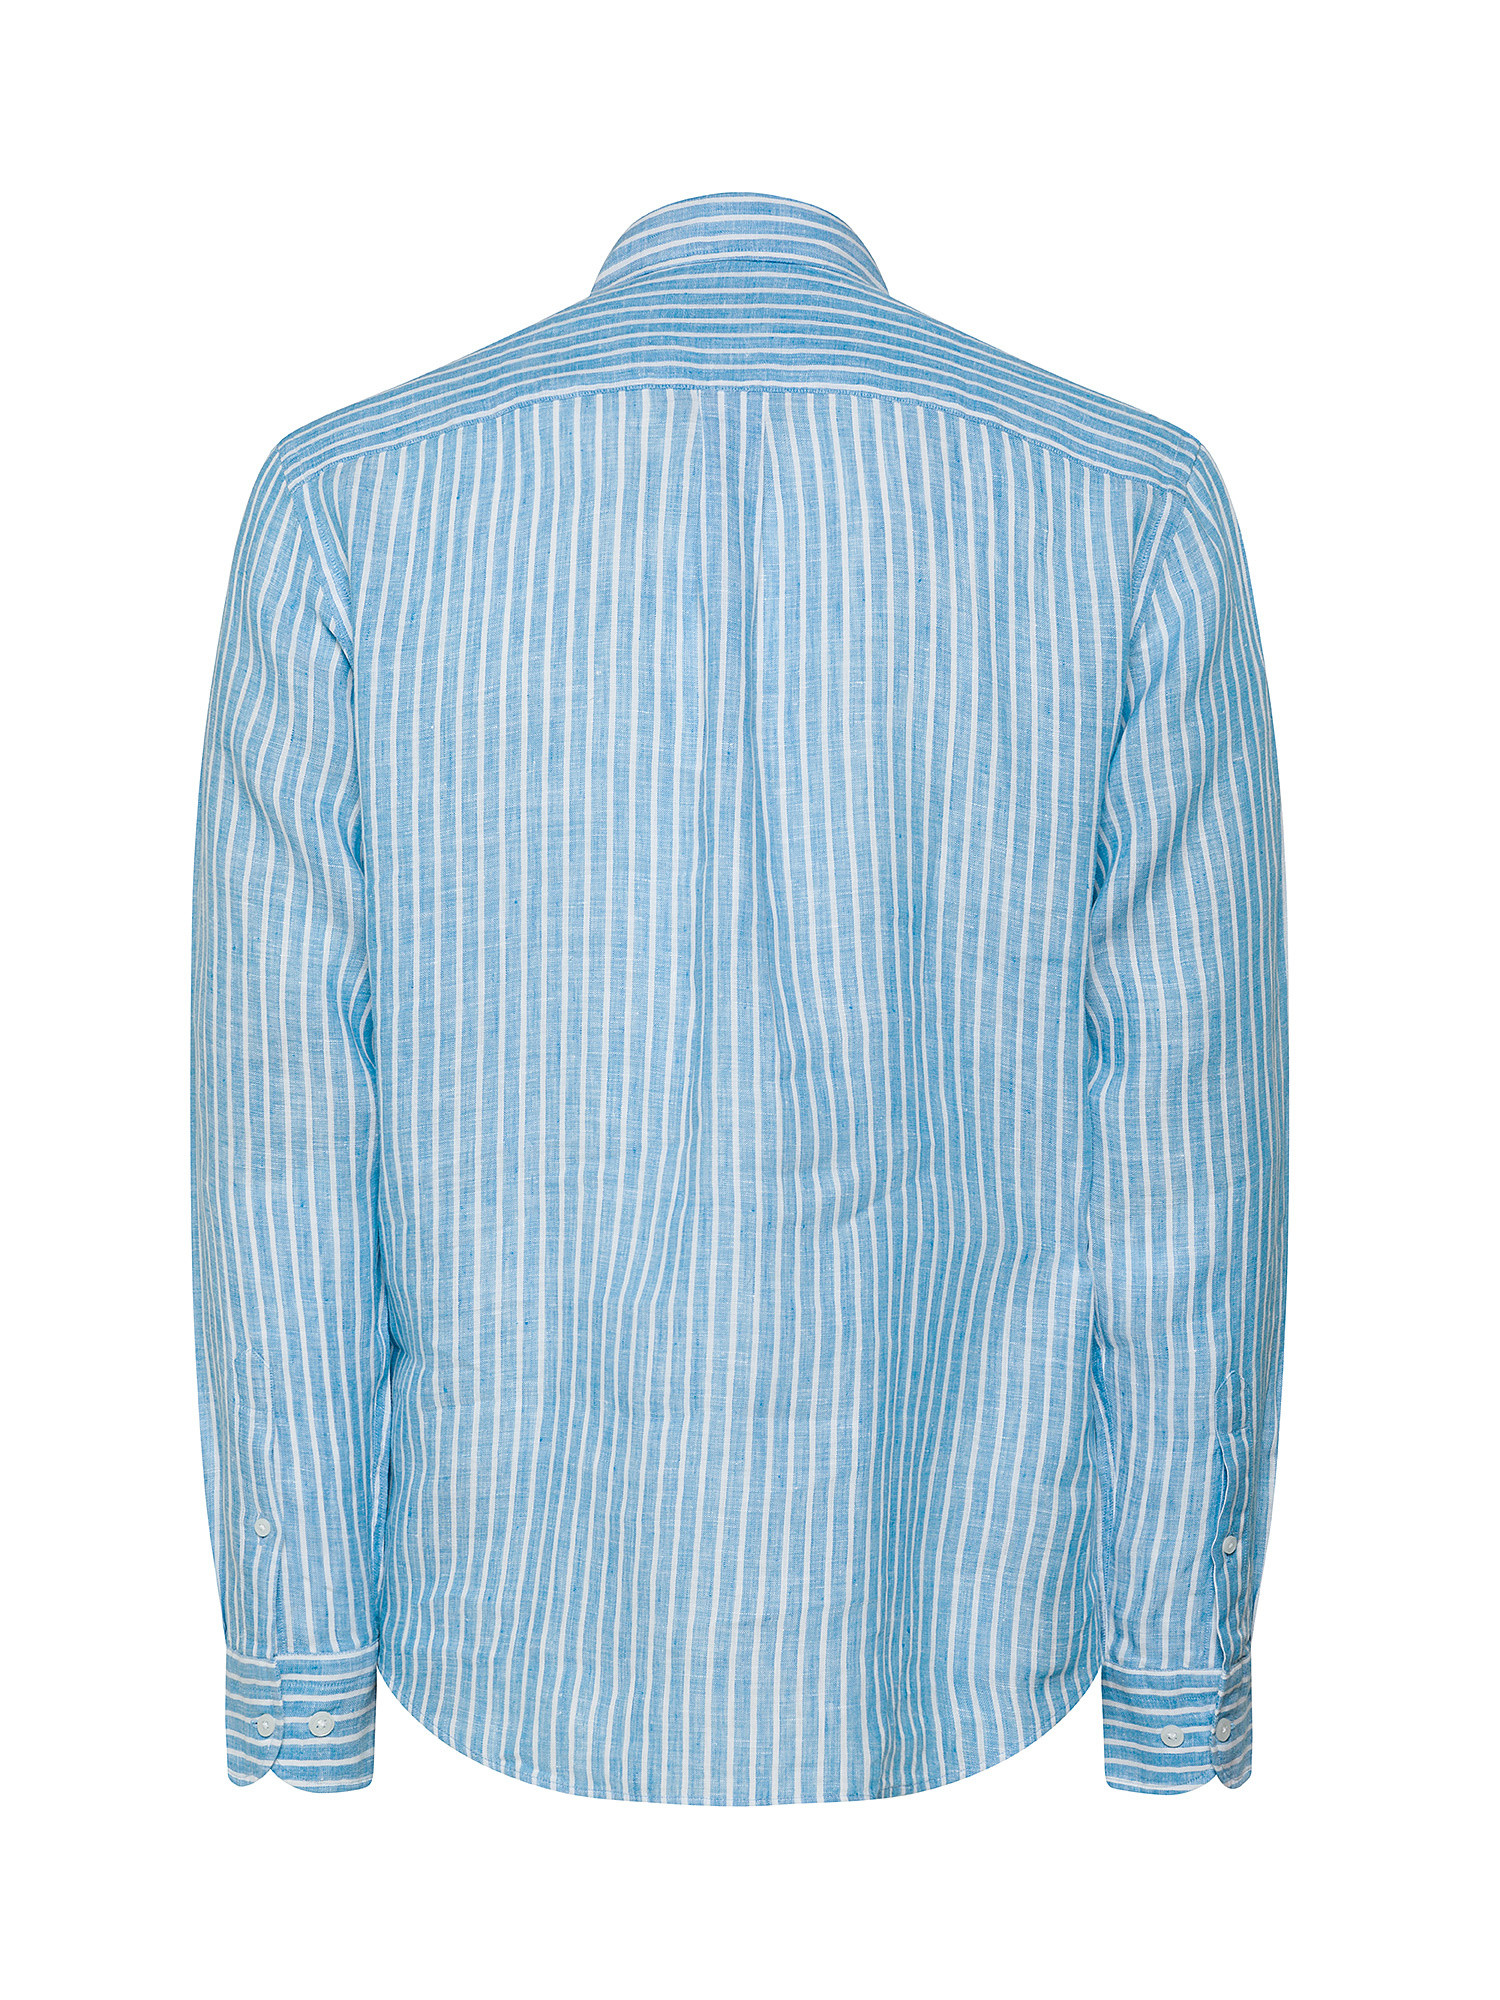 Luca D'Altieri - Tailor fit shirt in pure linen, Turquoise, large image number 1